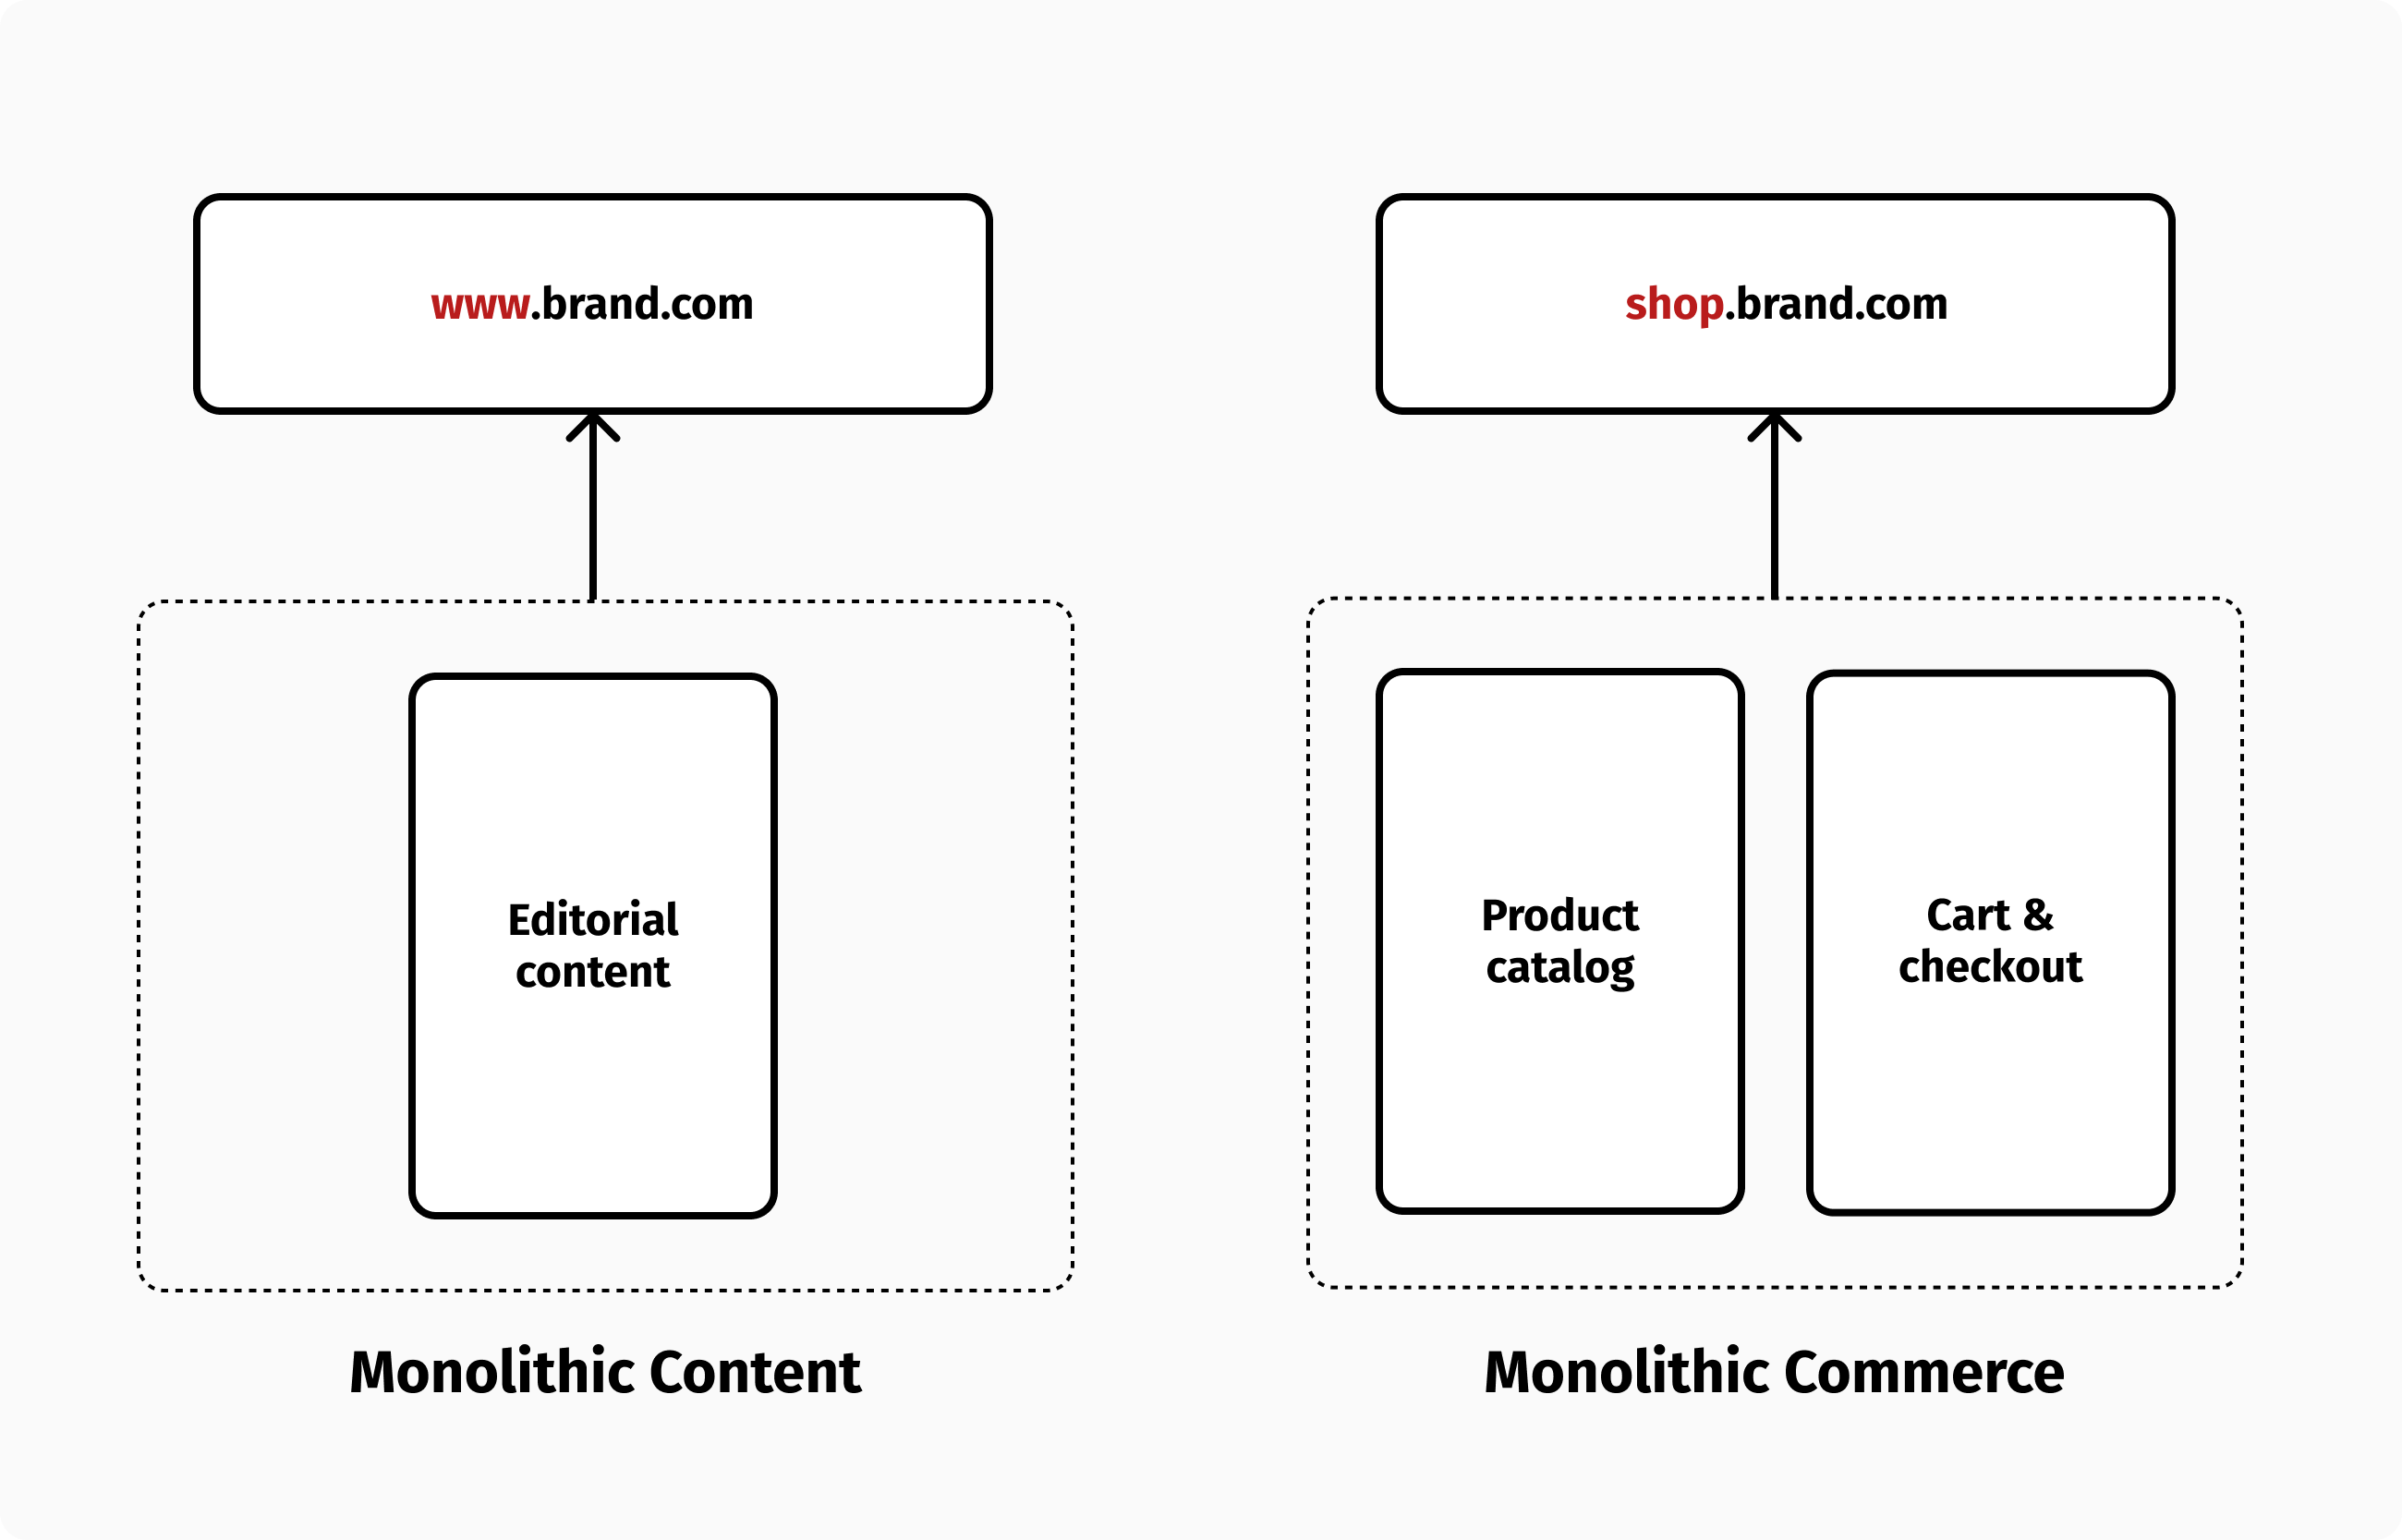 Monolithic composition of content and commerce.